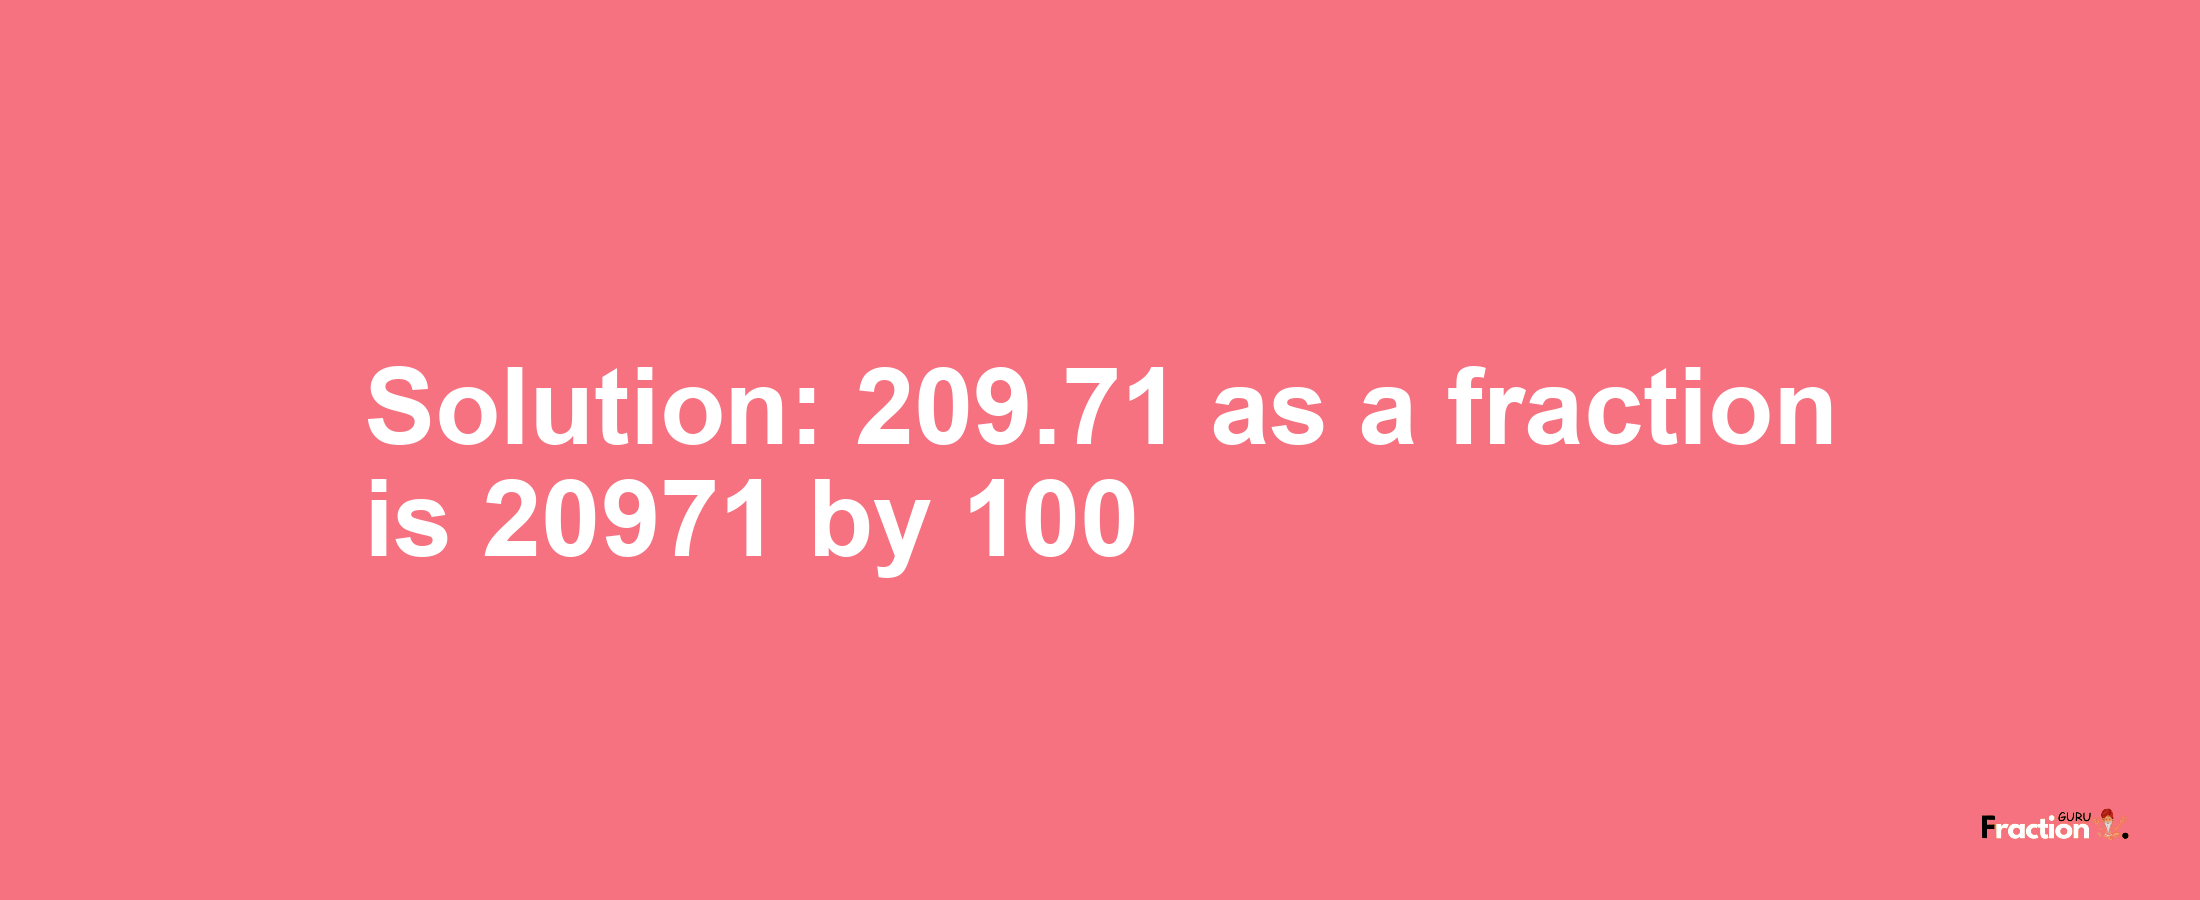 Solution:209.71 as a fraction is 20971/100